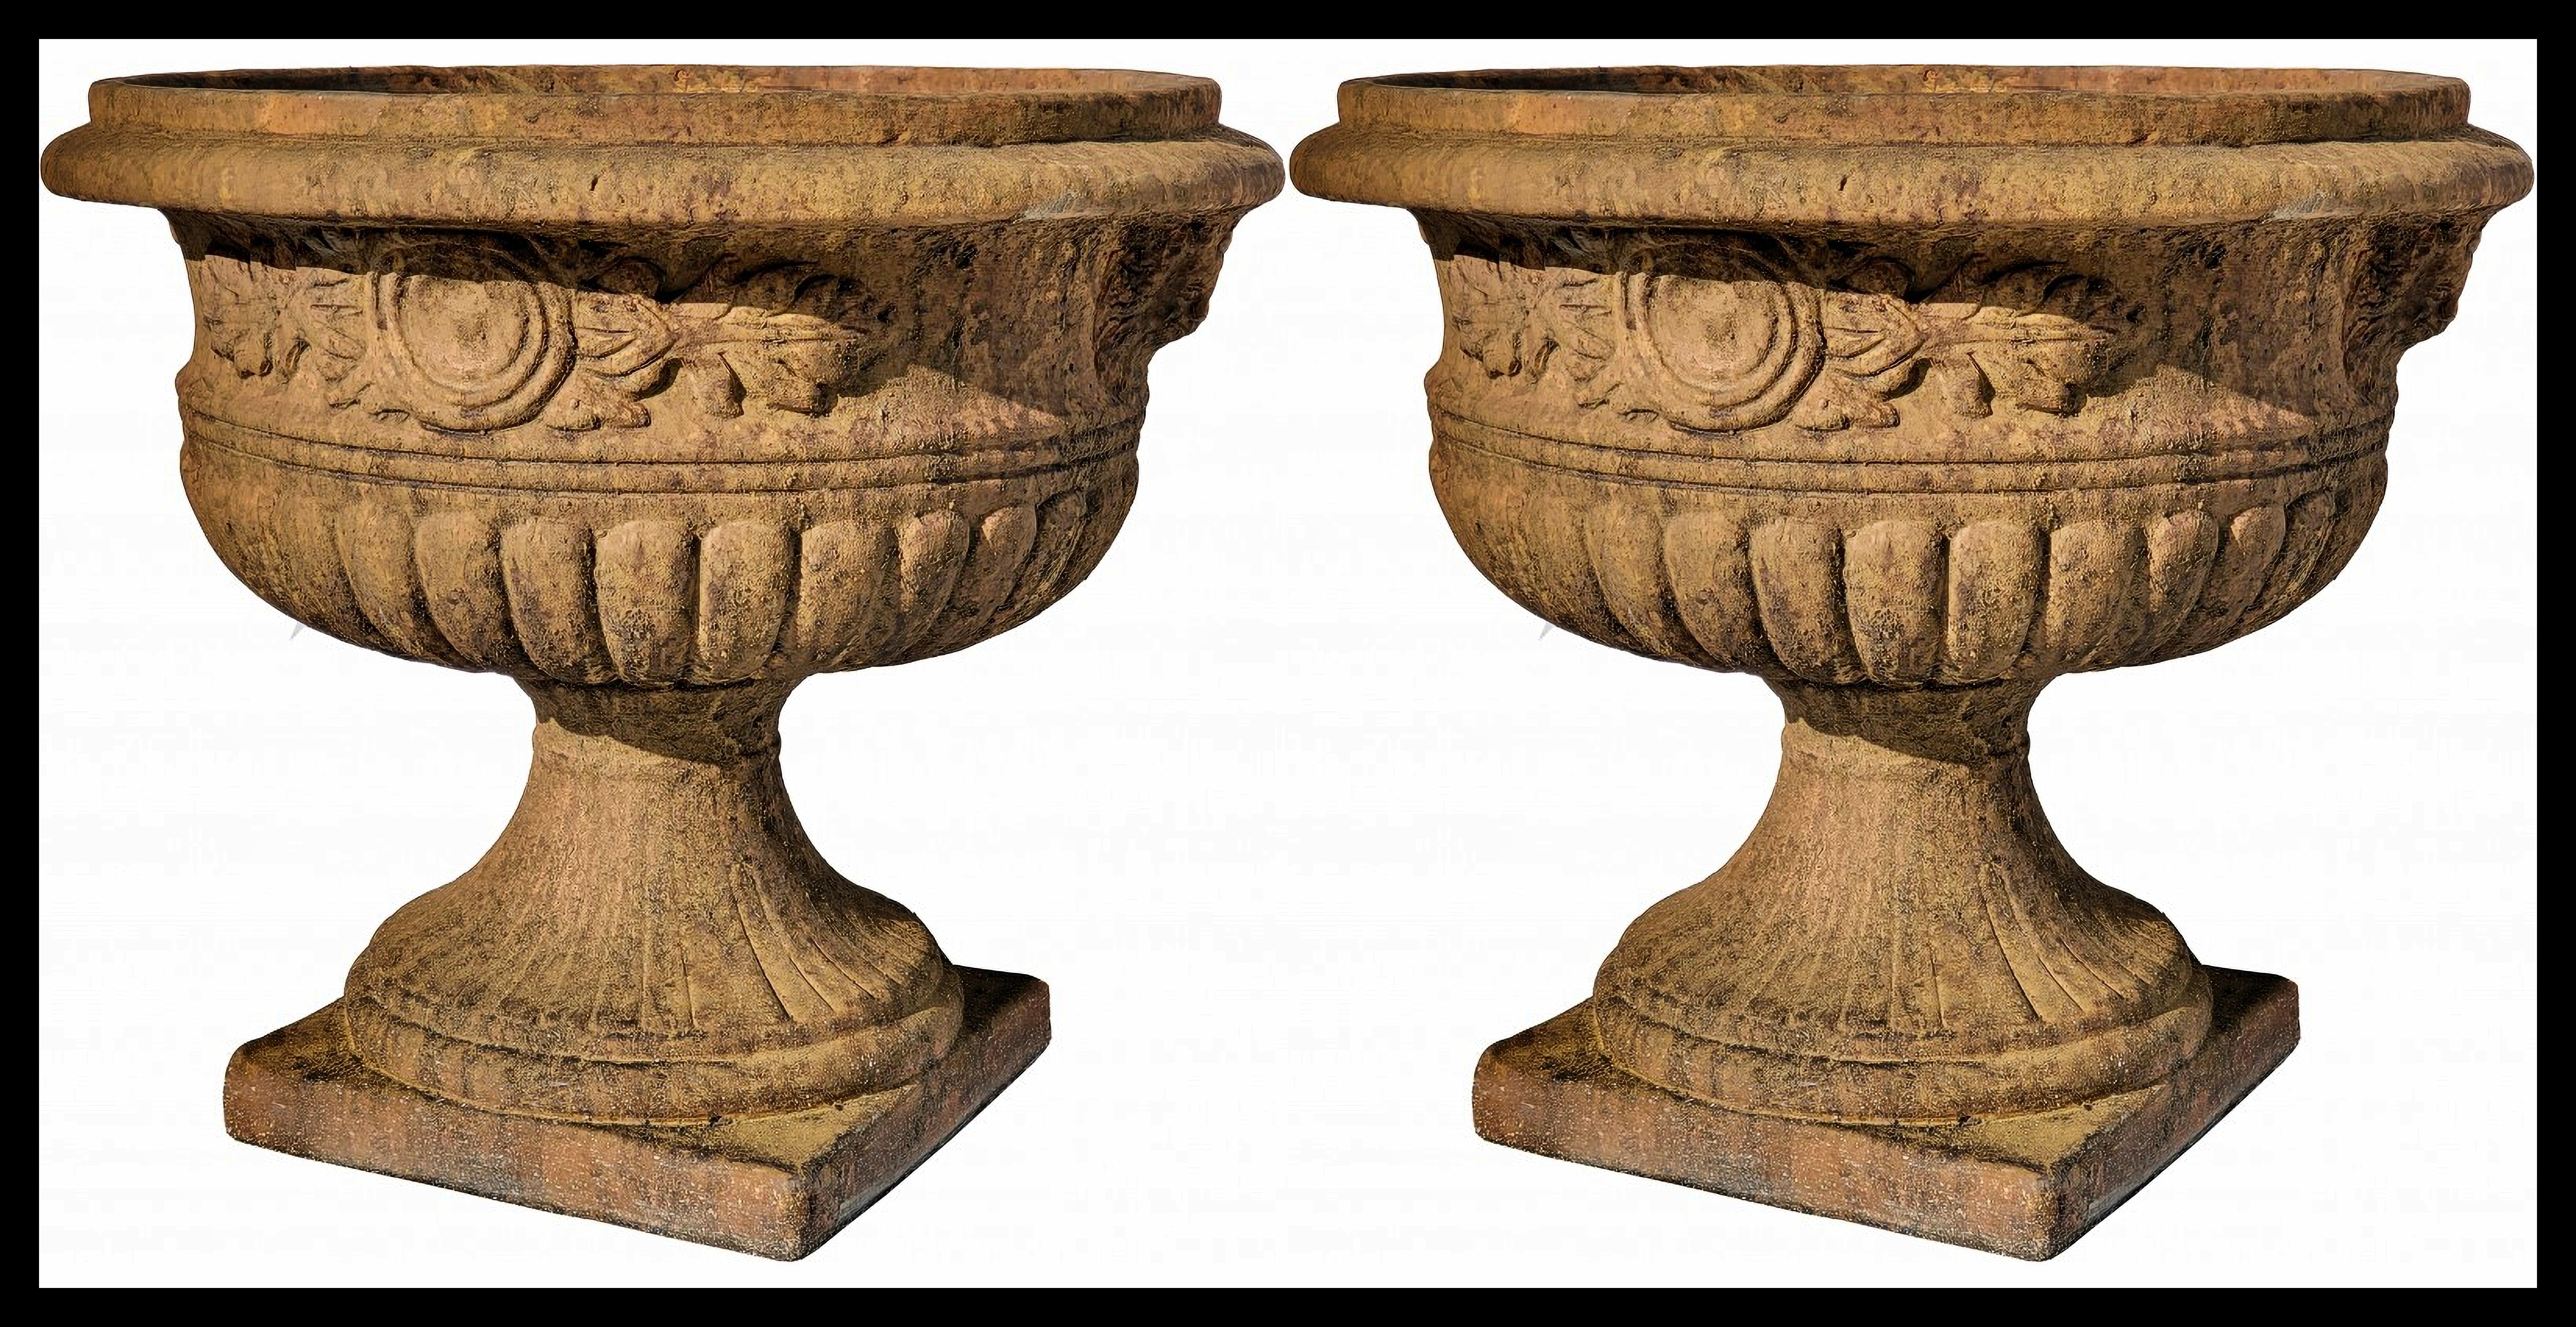 PAIR OF SENESE D TERRACOTTA VASES 20th Century

Medici chalice decorated with crowns of leaves and satyrs, 30 vertical pods.
HEIGHT 45 cm
INTERNAL DEPTH OF THE BASIN 21 cm
WEIGHT 15 Kg
SQUARE BASE - SIDE X SIDE 28 X 28 cm
EXTERNAL MOUTH DIAMETER 52